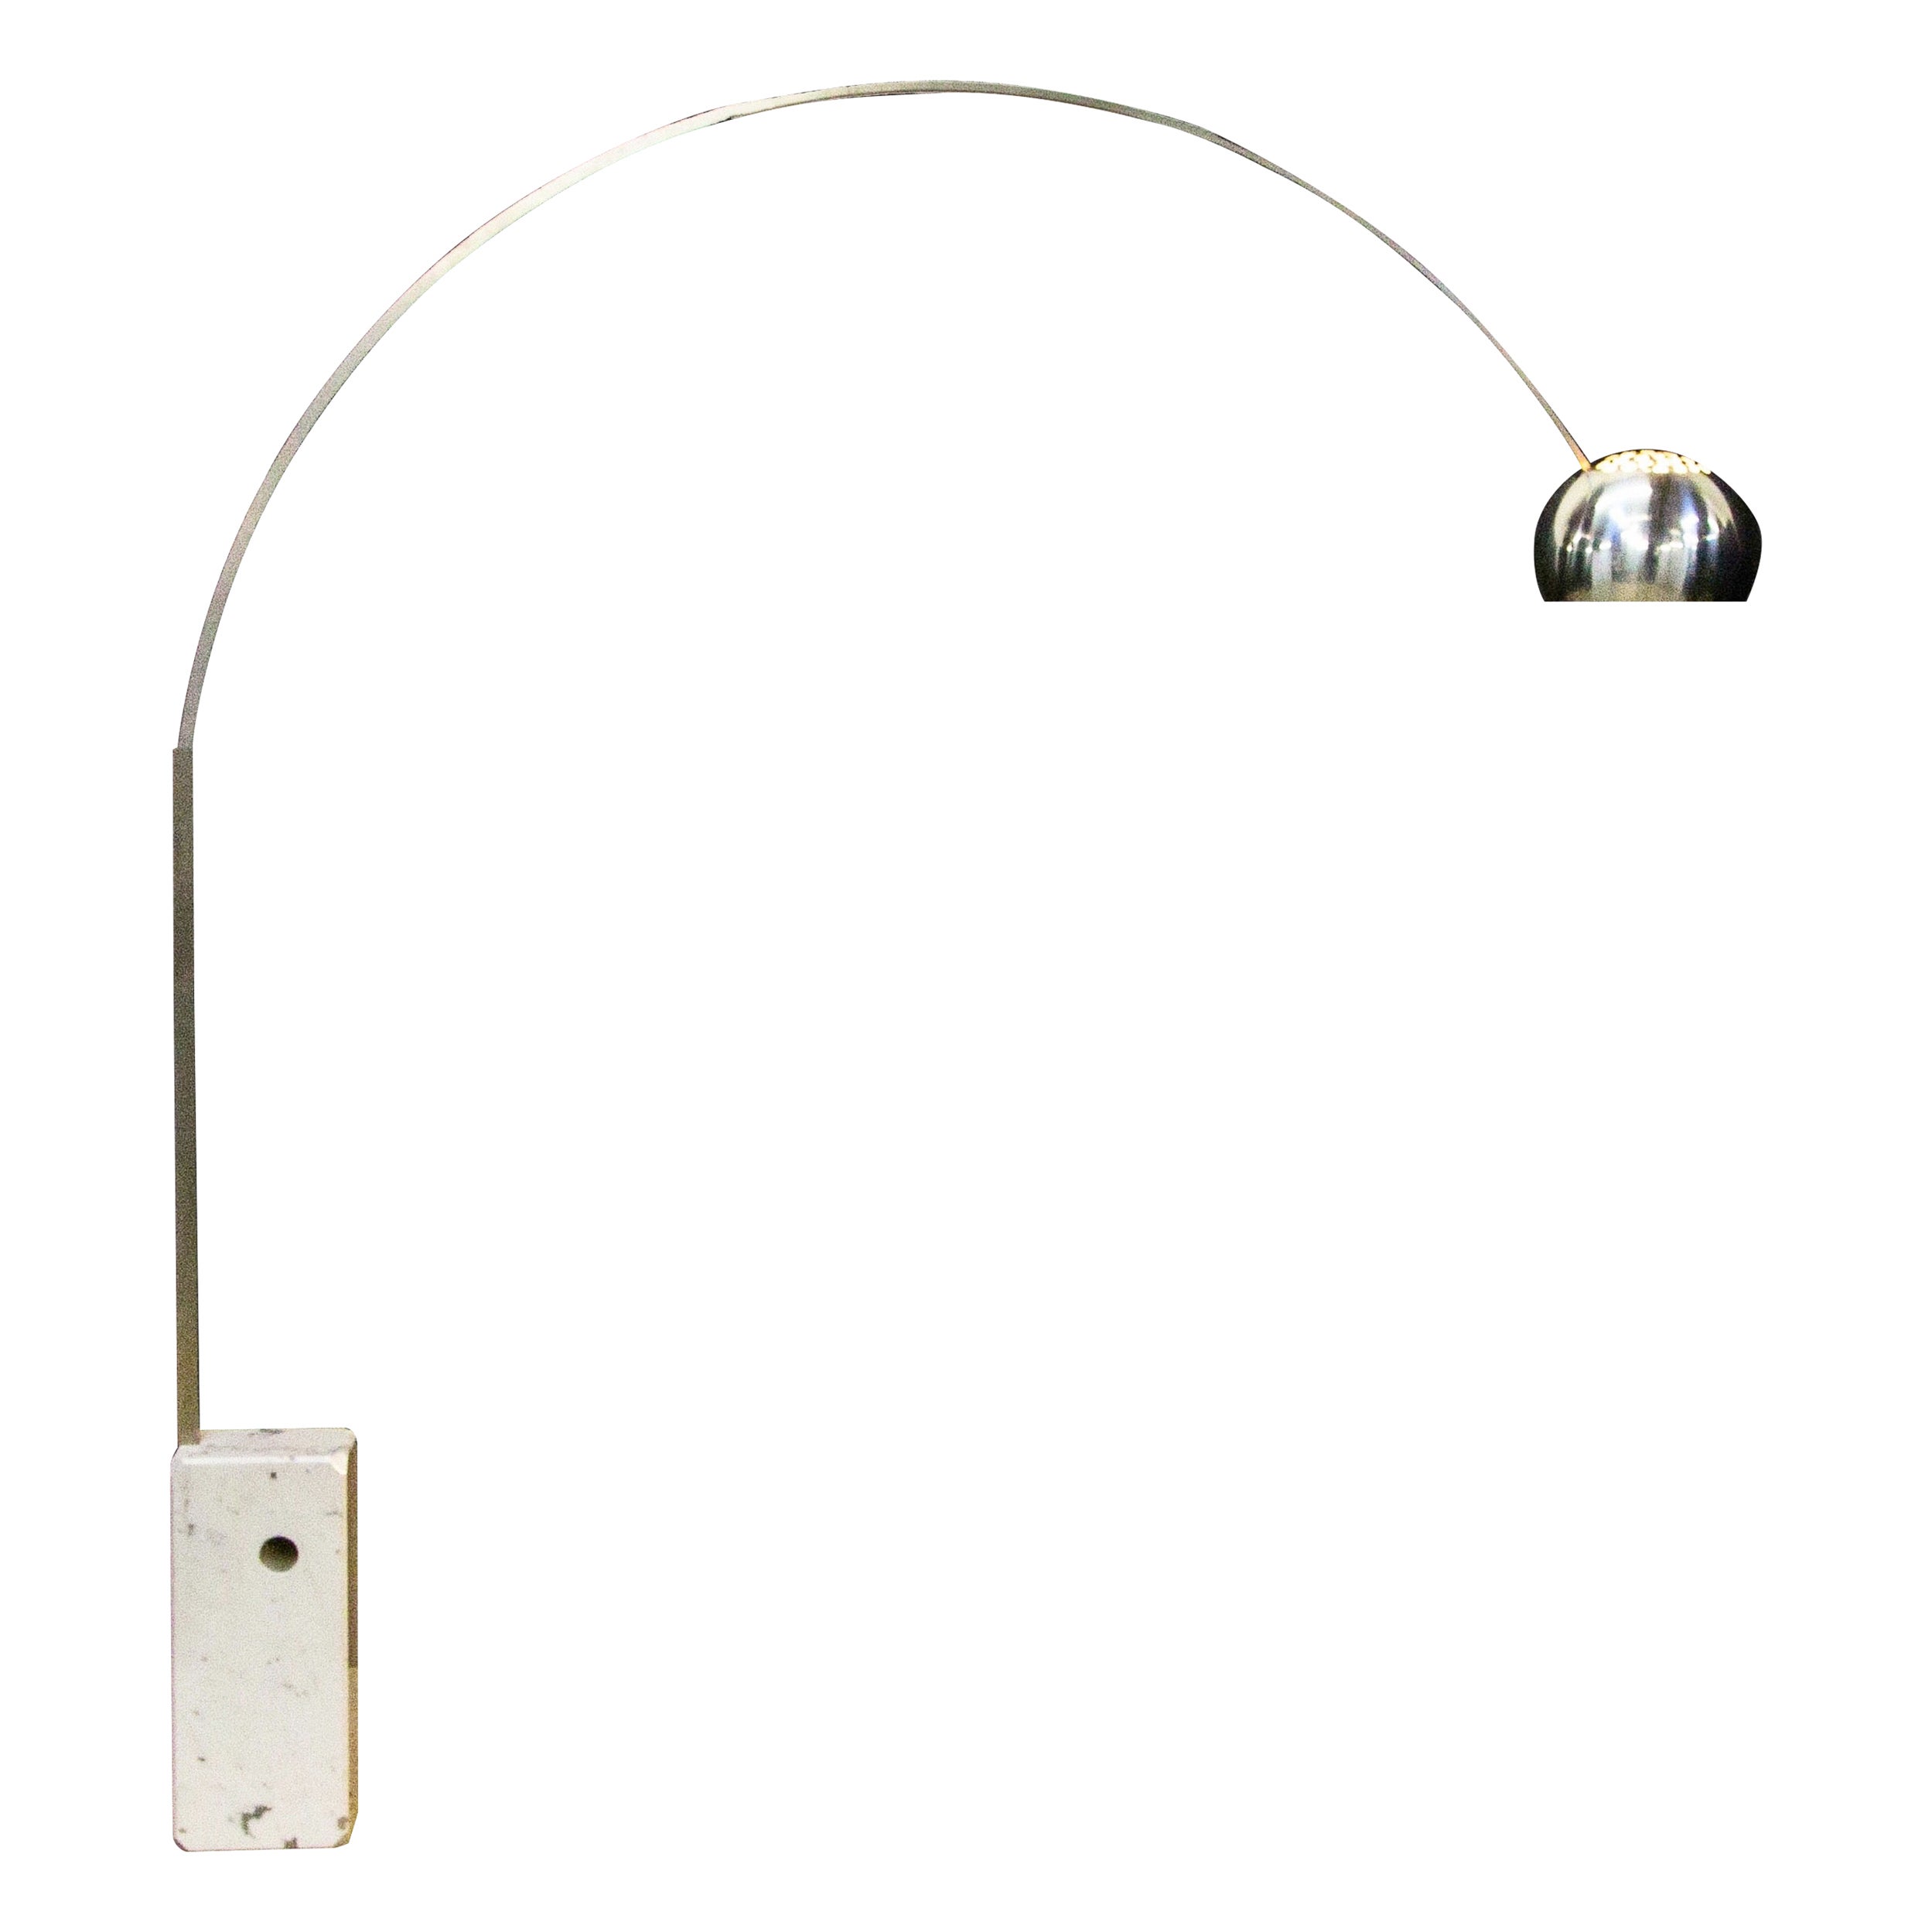 Early Production 'Arco' Marble Floor Lamp by Castiglioni for Flos, 1962, Signed 